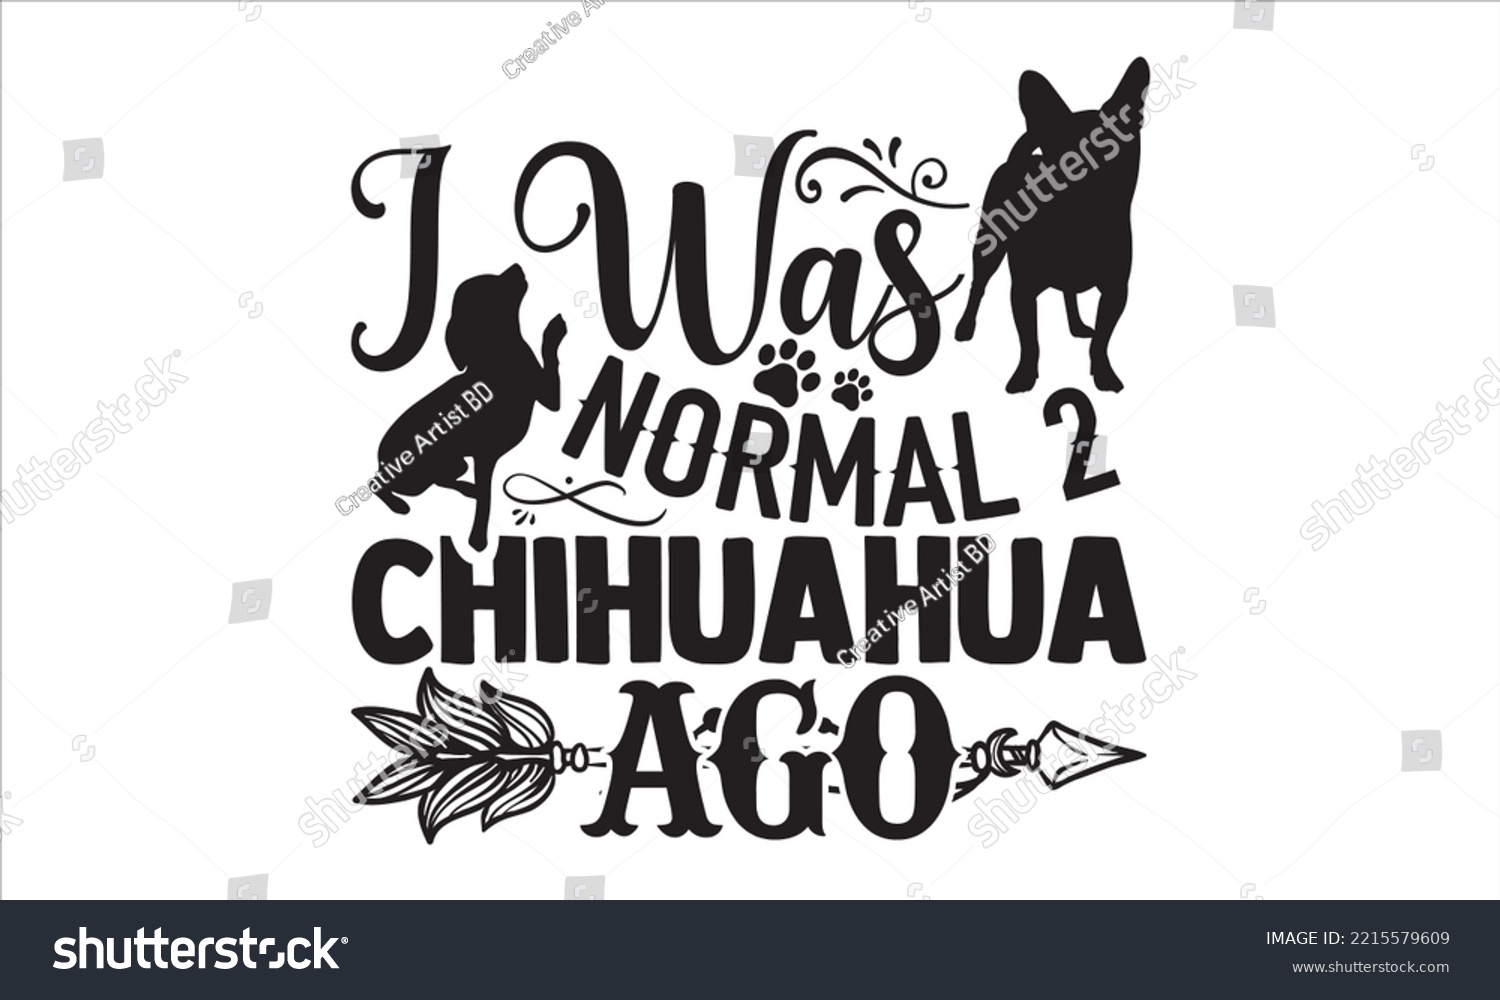 SVG of I Was Normal 2 Chihuahua Ago - Chihuahua T shirt Design, Hand drawn vintage illustration with hand-lettering and decoration elements, Cut Files for Cricut Svg, Digital Download svg